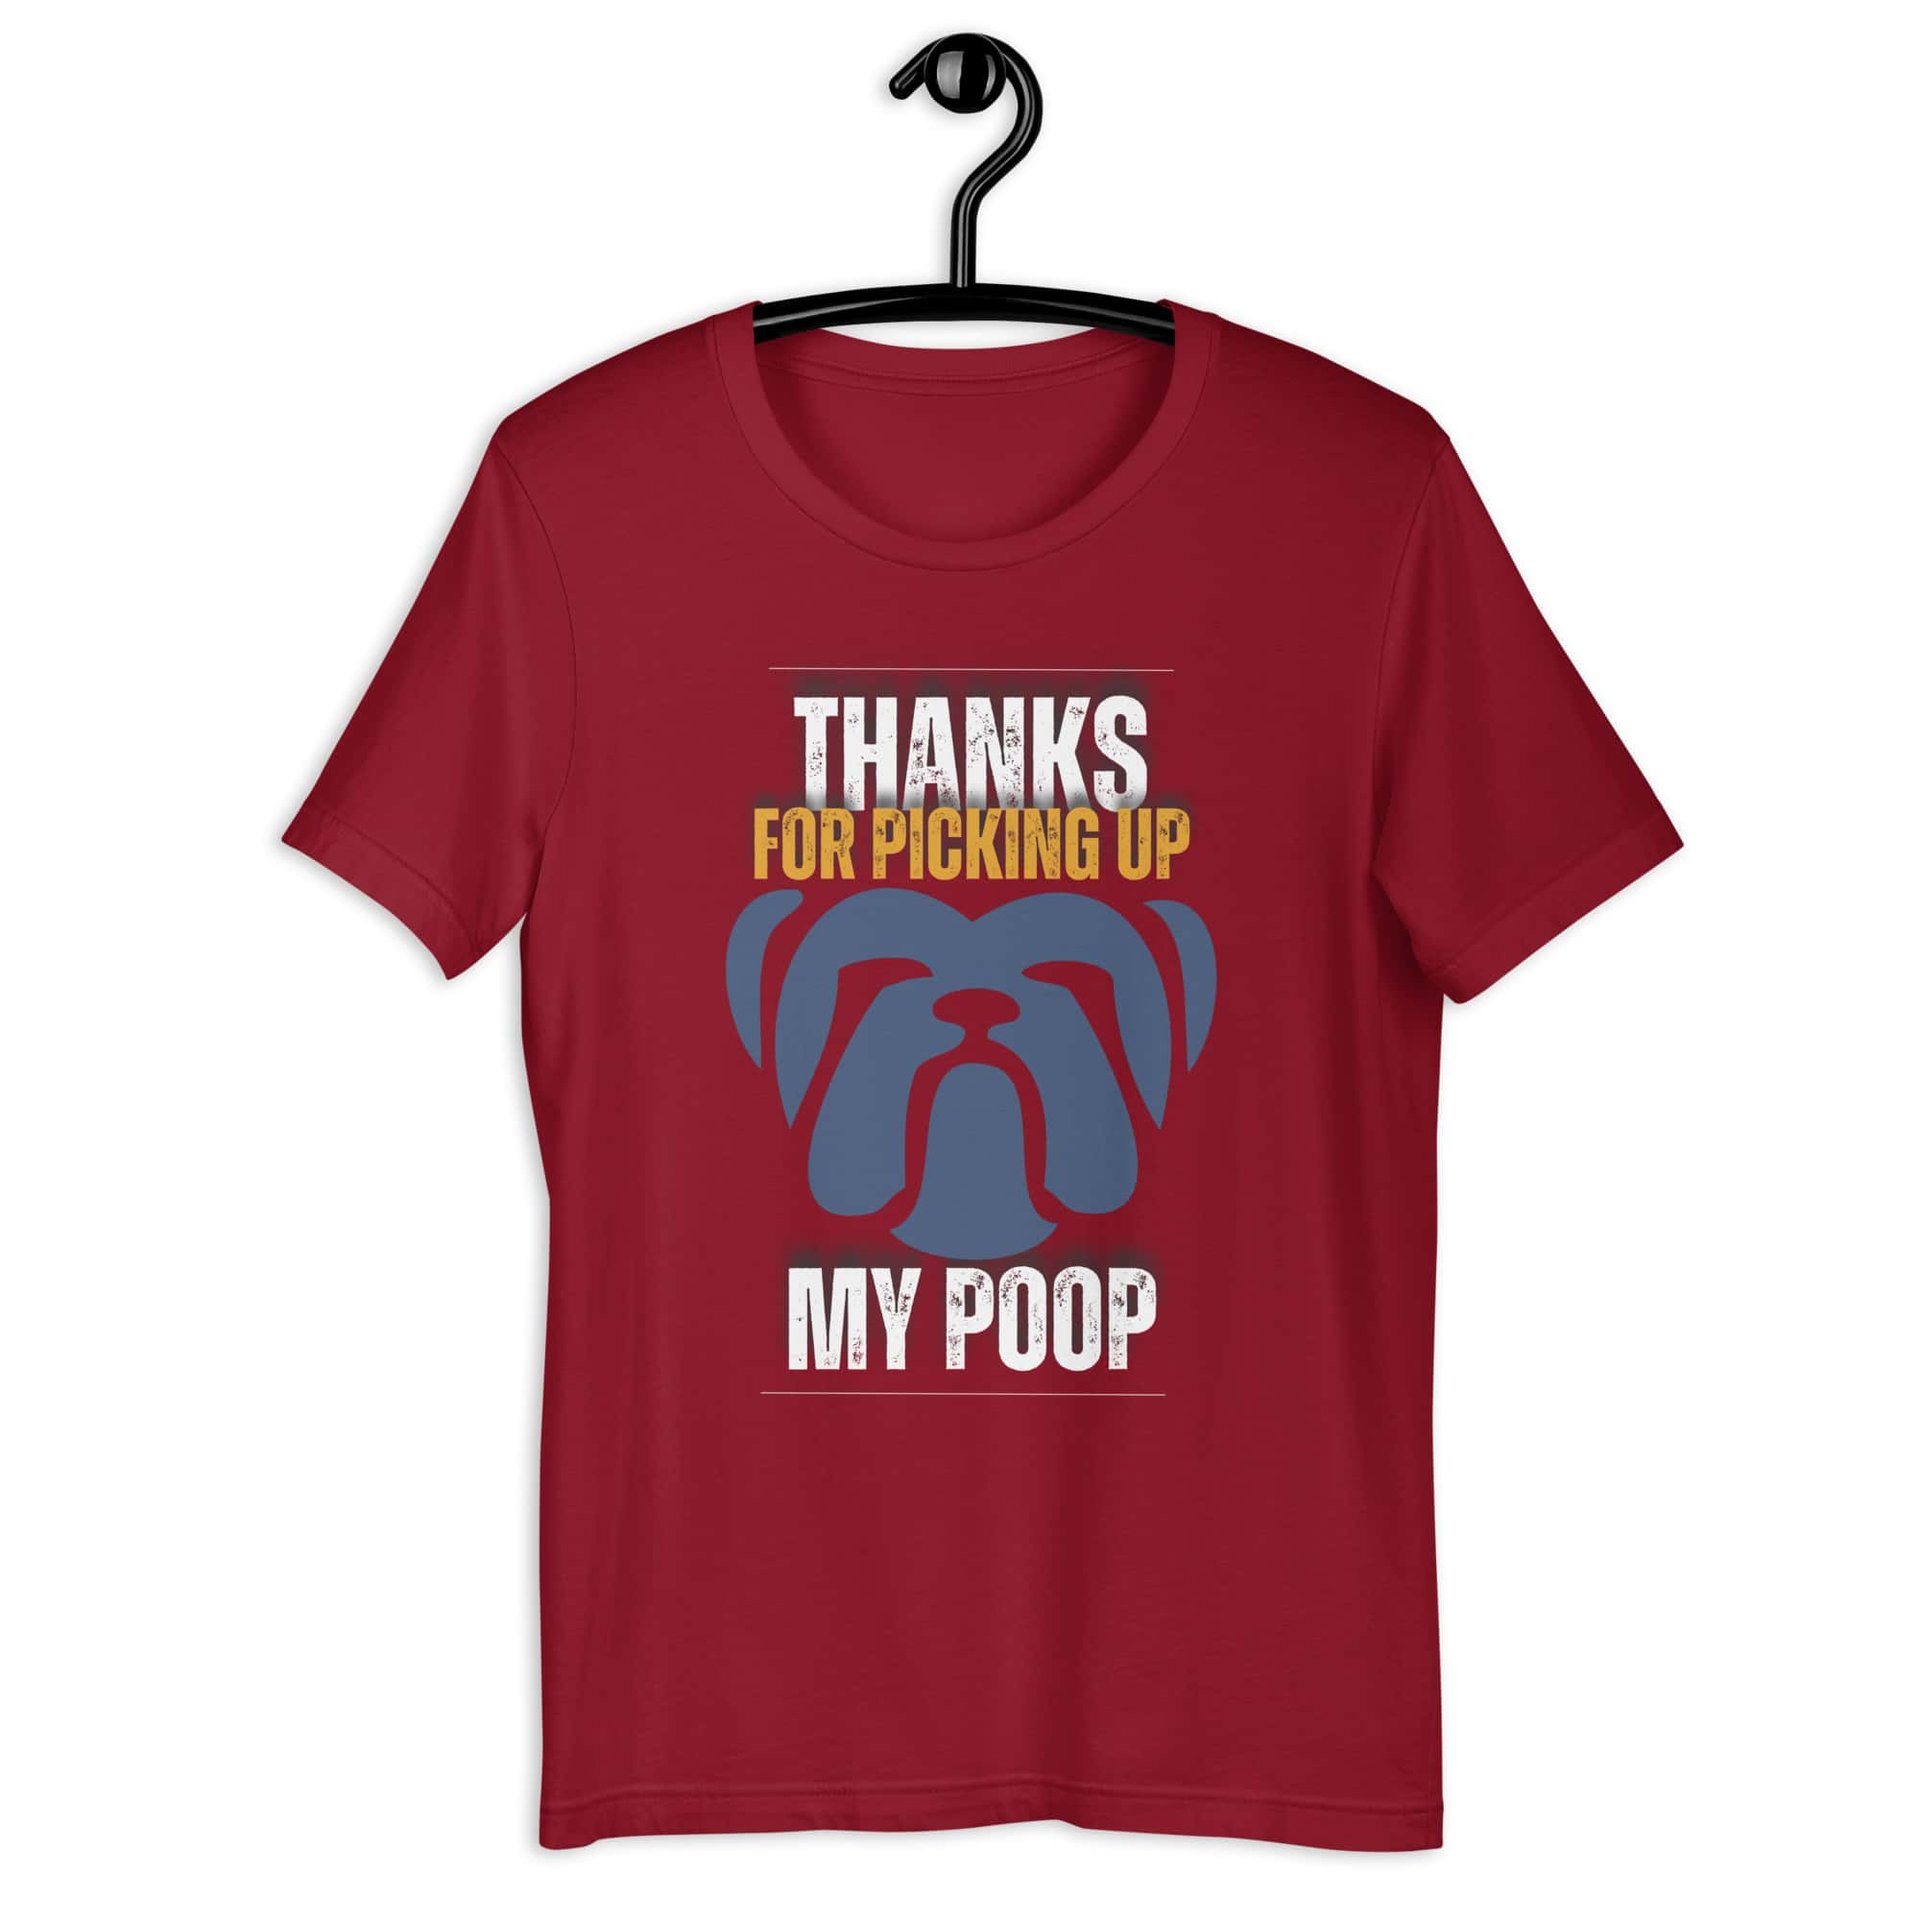 Thanks For Picking Up My POOP Funny Bulldog Unisex T-Shirt. Cardinal